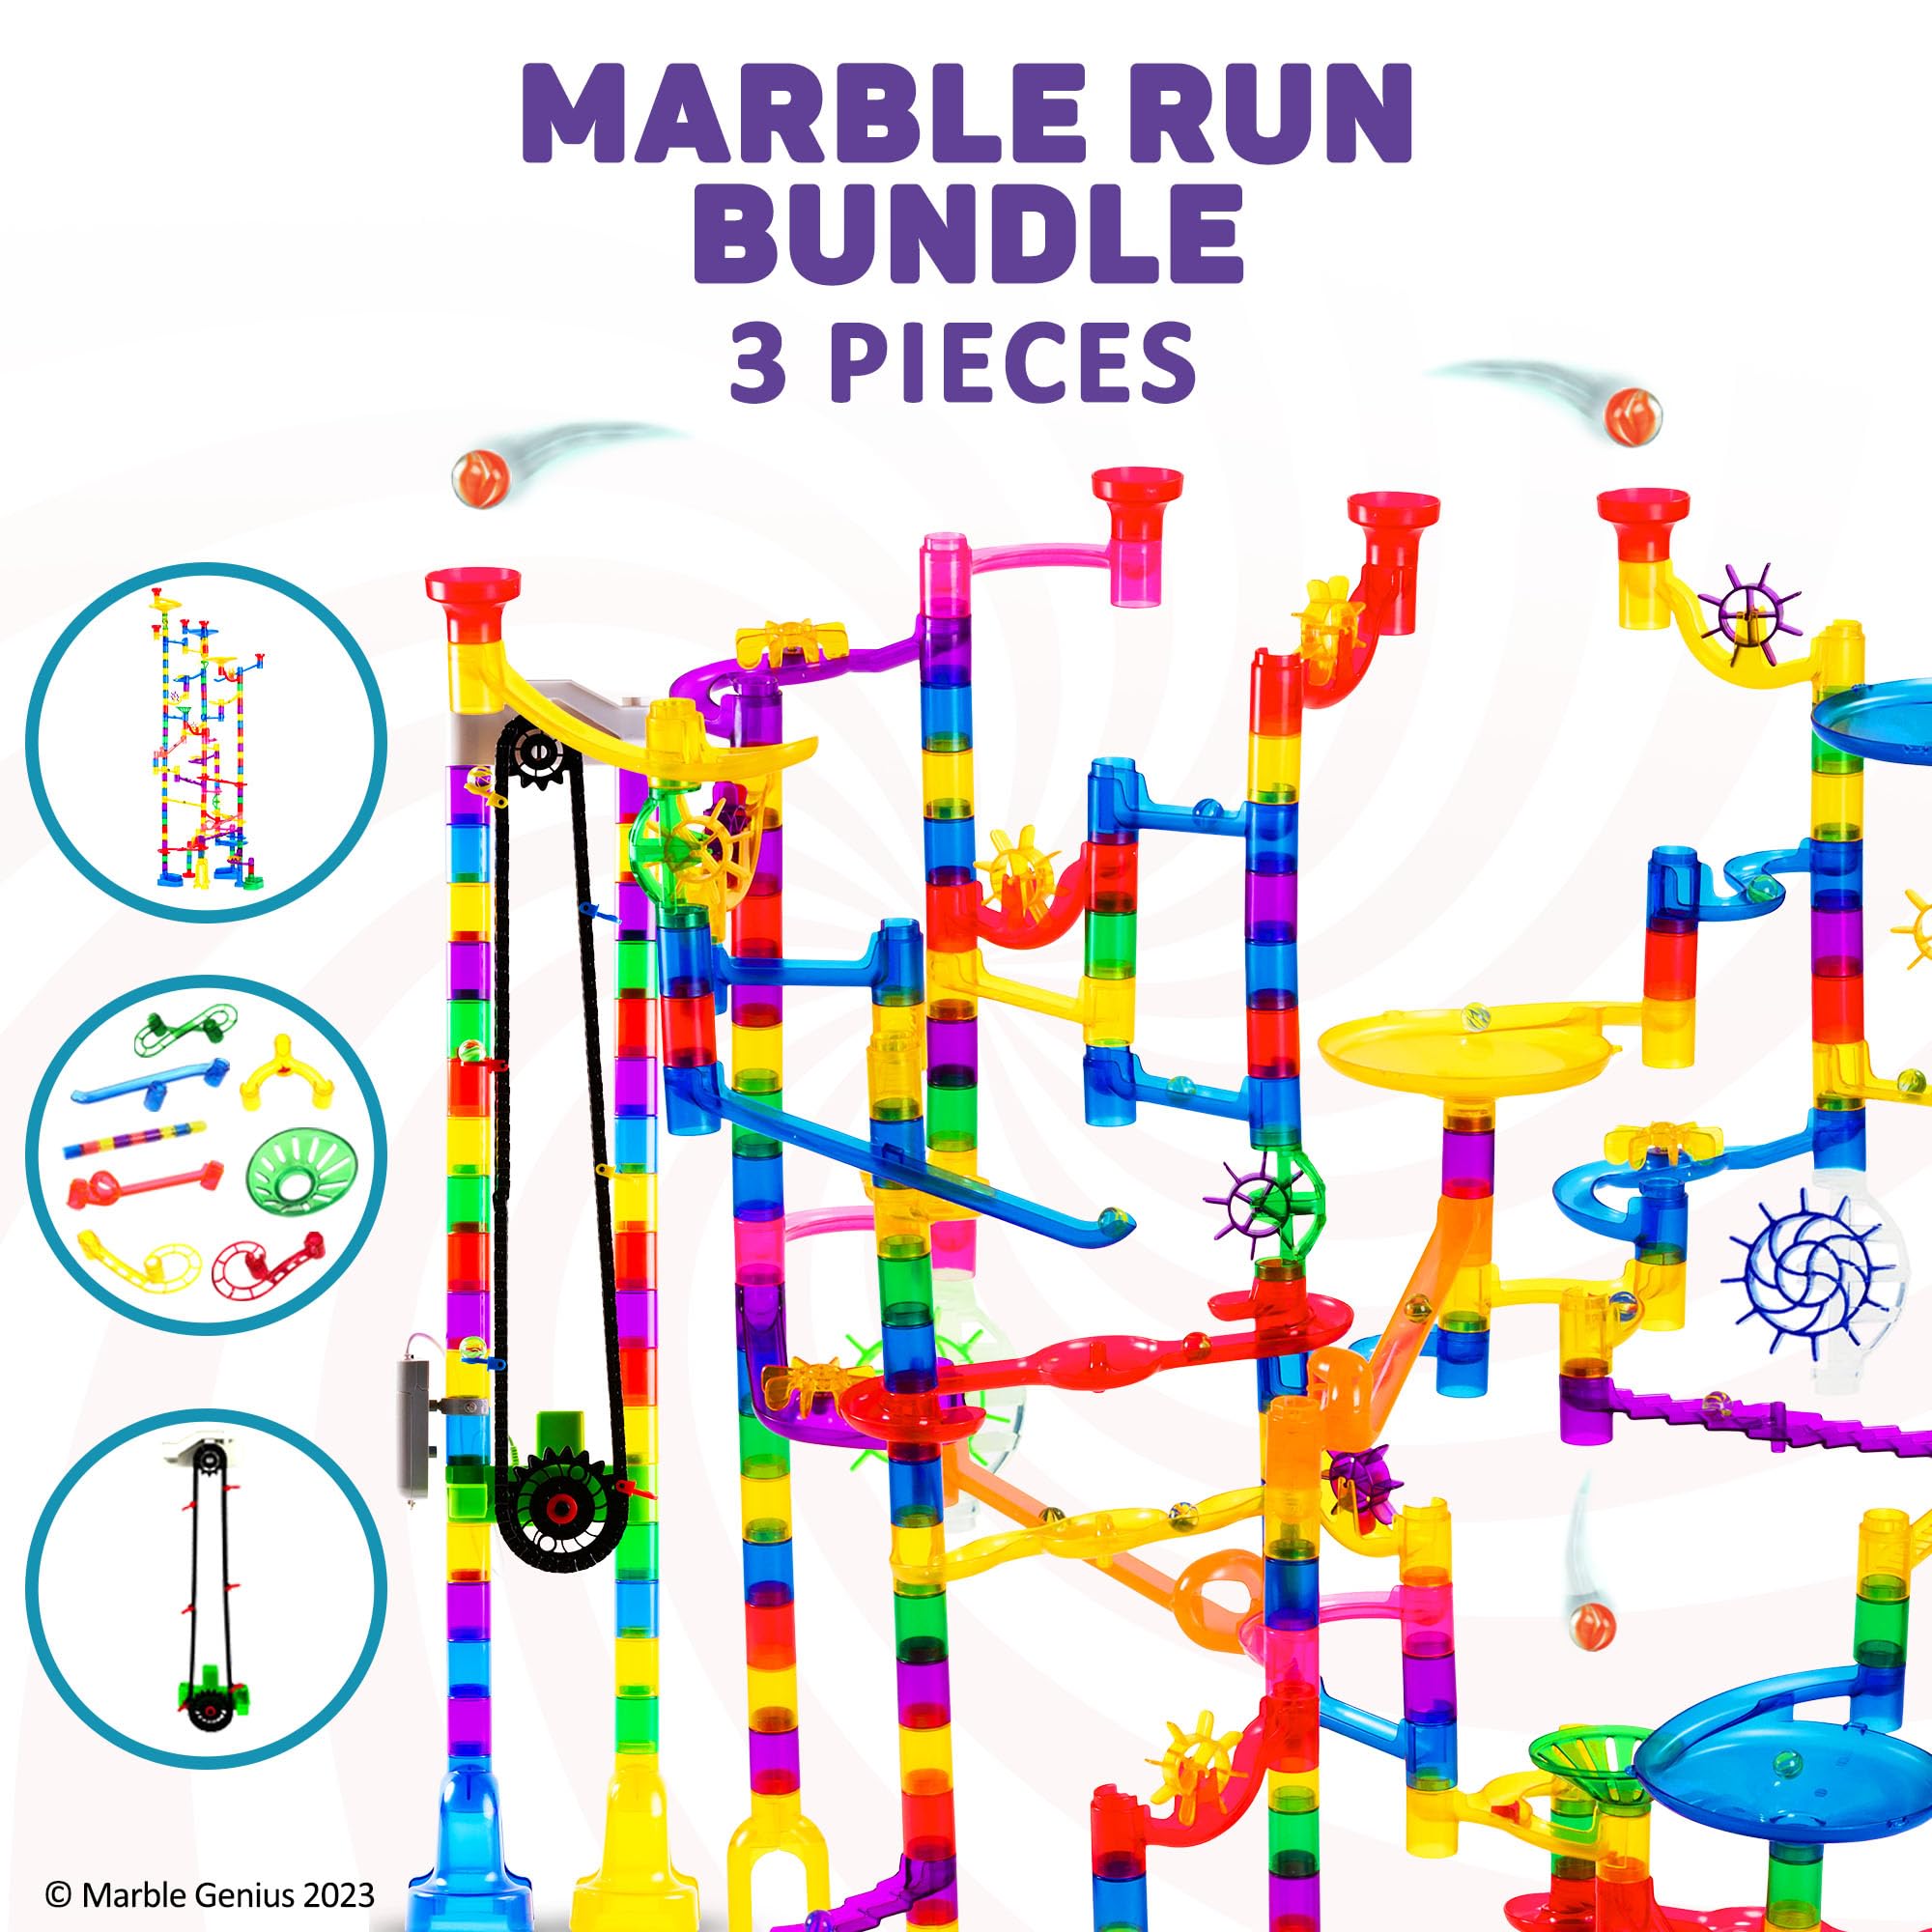 Marble Genius Bundle: Extreme Set (300 Pieces), Automatic Chain Lift and, Primary Booster Set (20 Pieces), Maze Track or Race Games for Kids, Adults, Teens, and Toddlers